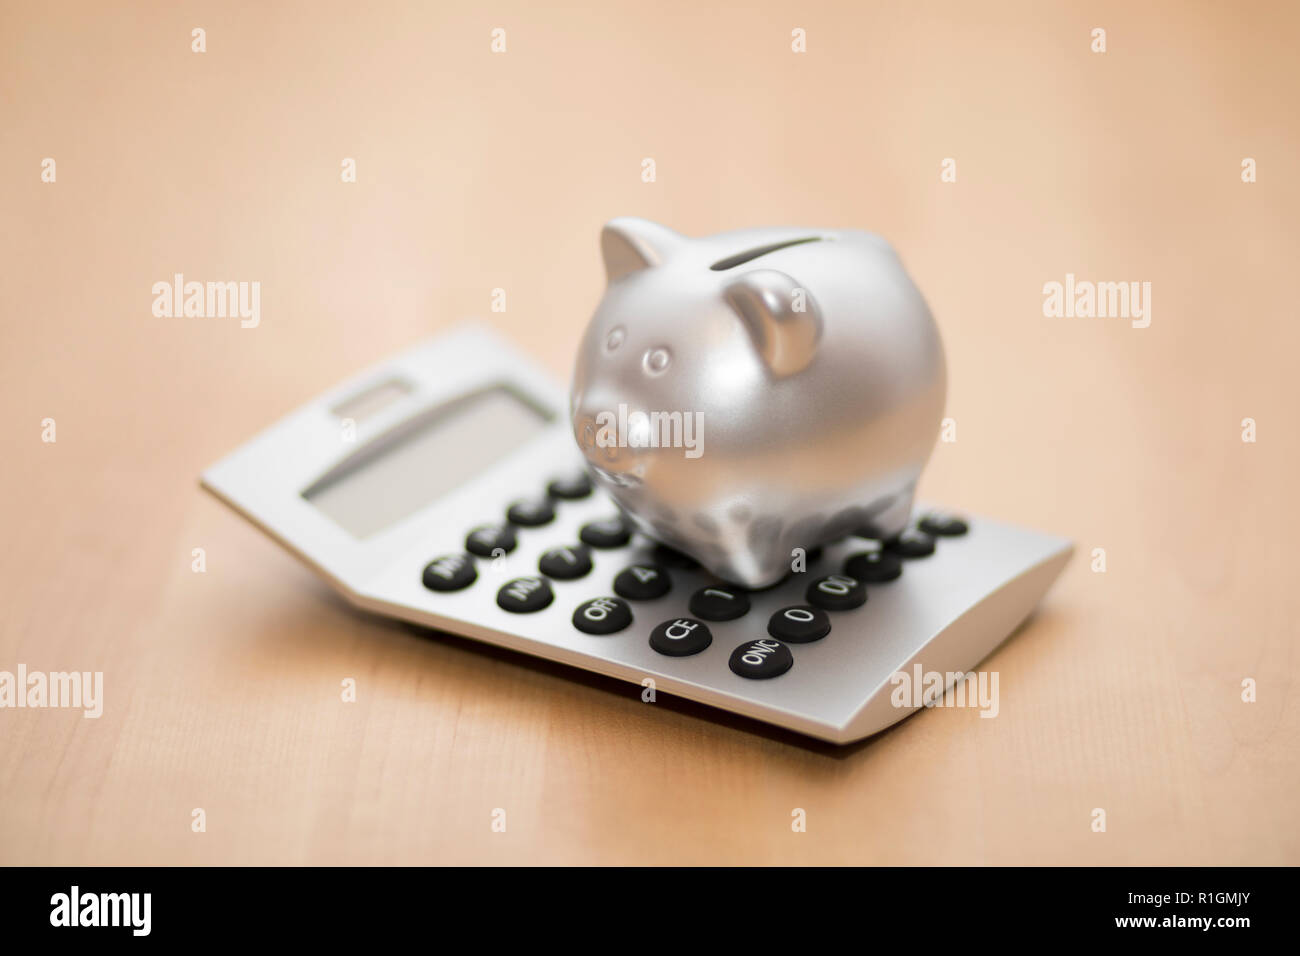 Piggy bank on calculator. Saving, accounting or banking concept. Stock Photo